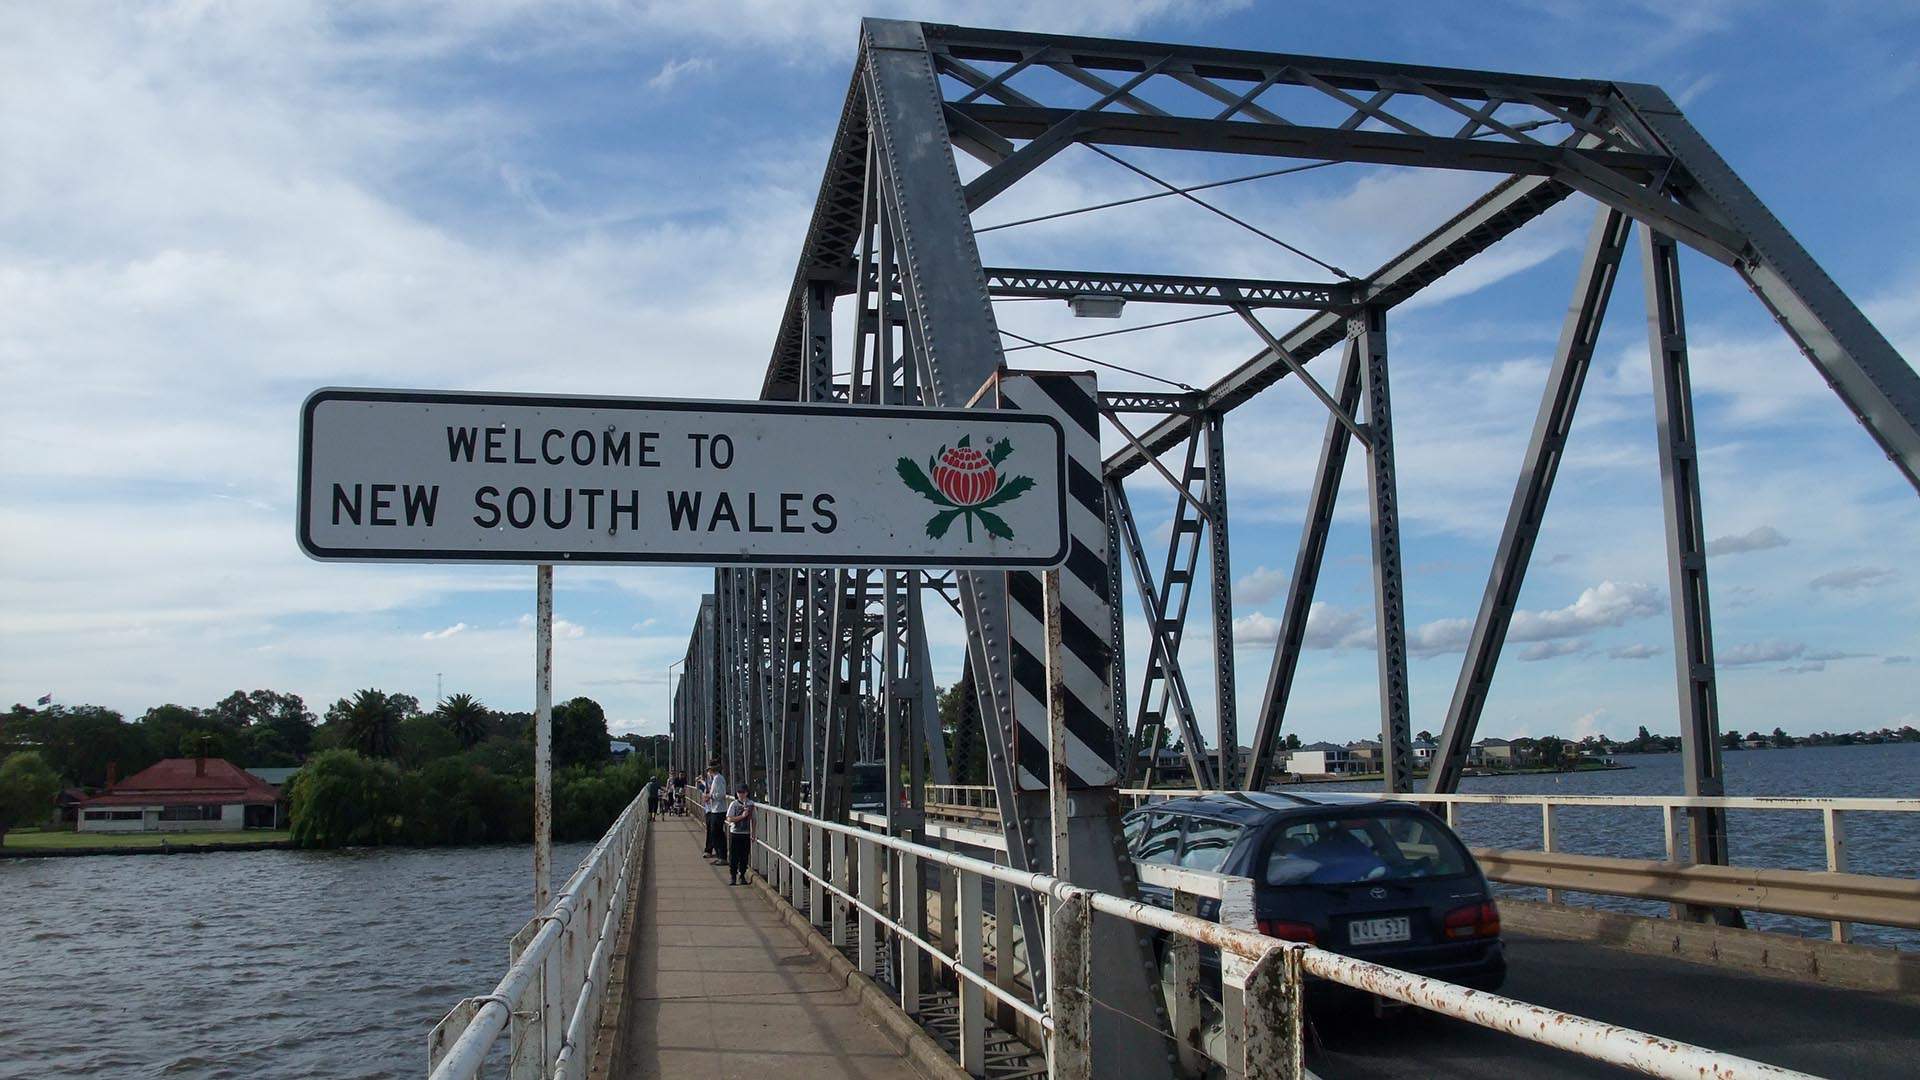 Victoria Has Fully Opened Its Border to New South Wales